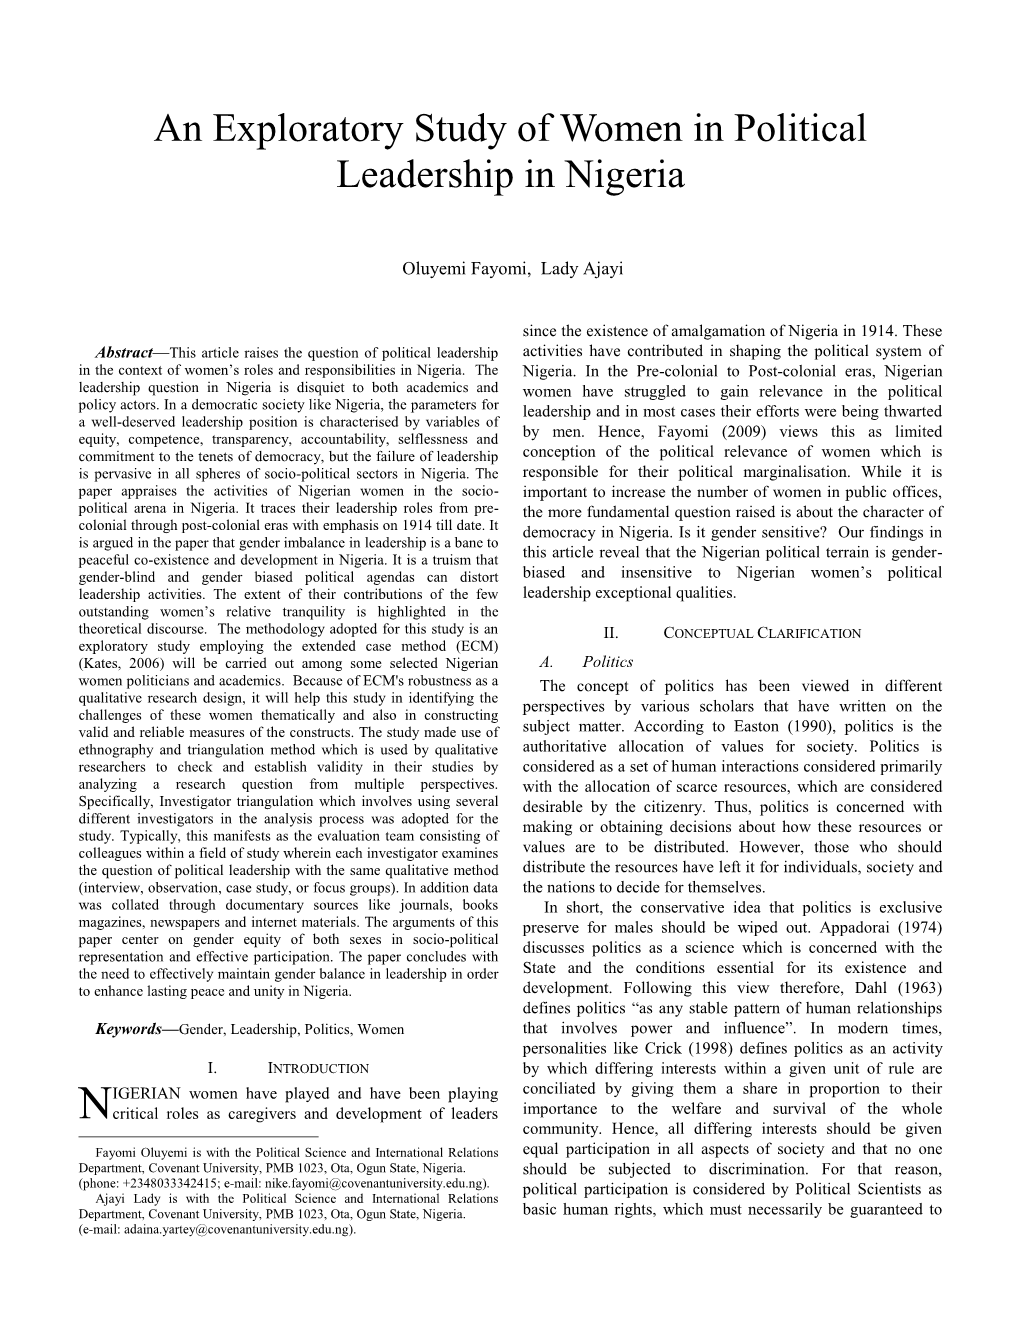 An Exploratory Study of Women in Political Leadership in Nigeria